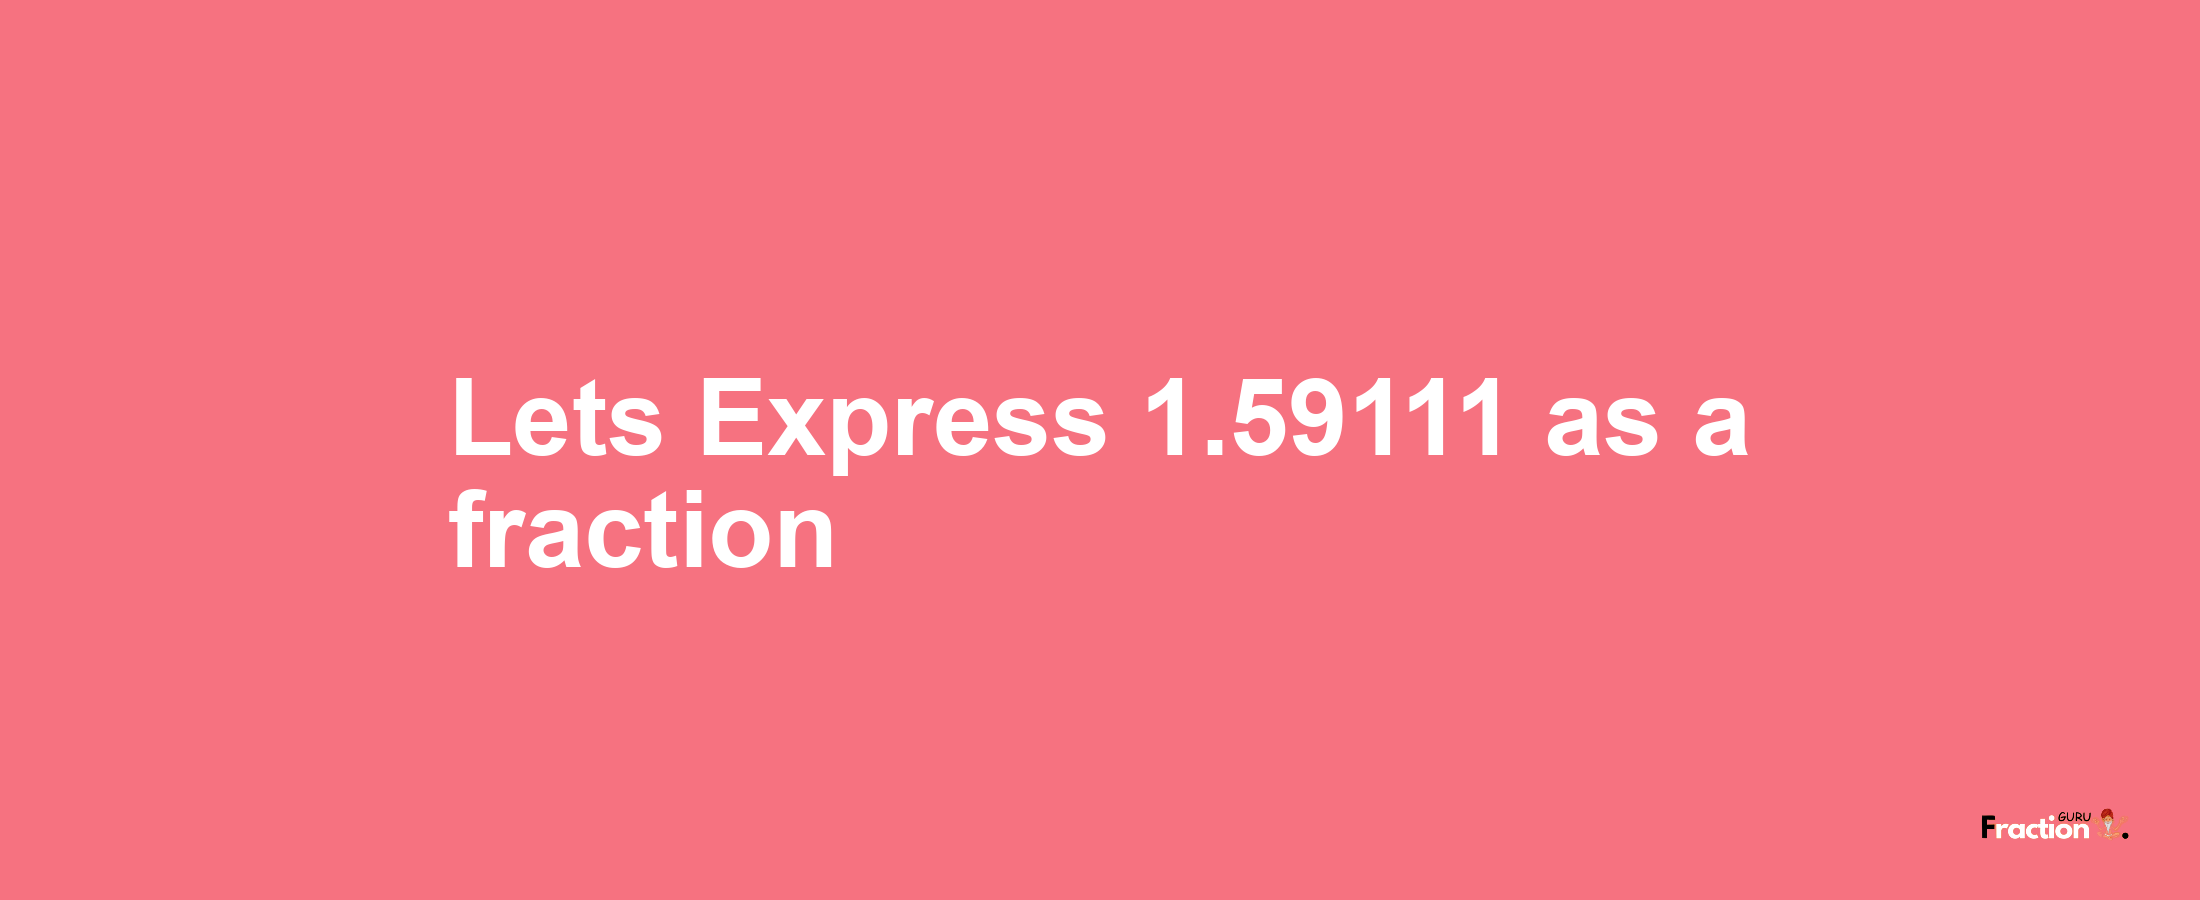 Lets Express 1.59111 as afraction